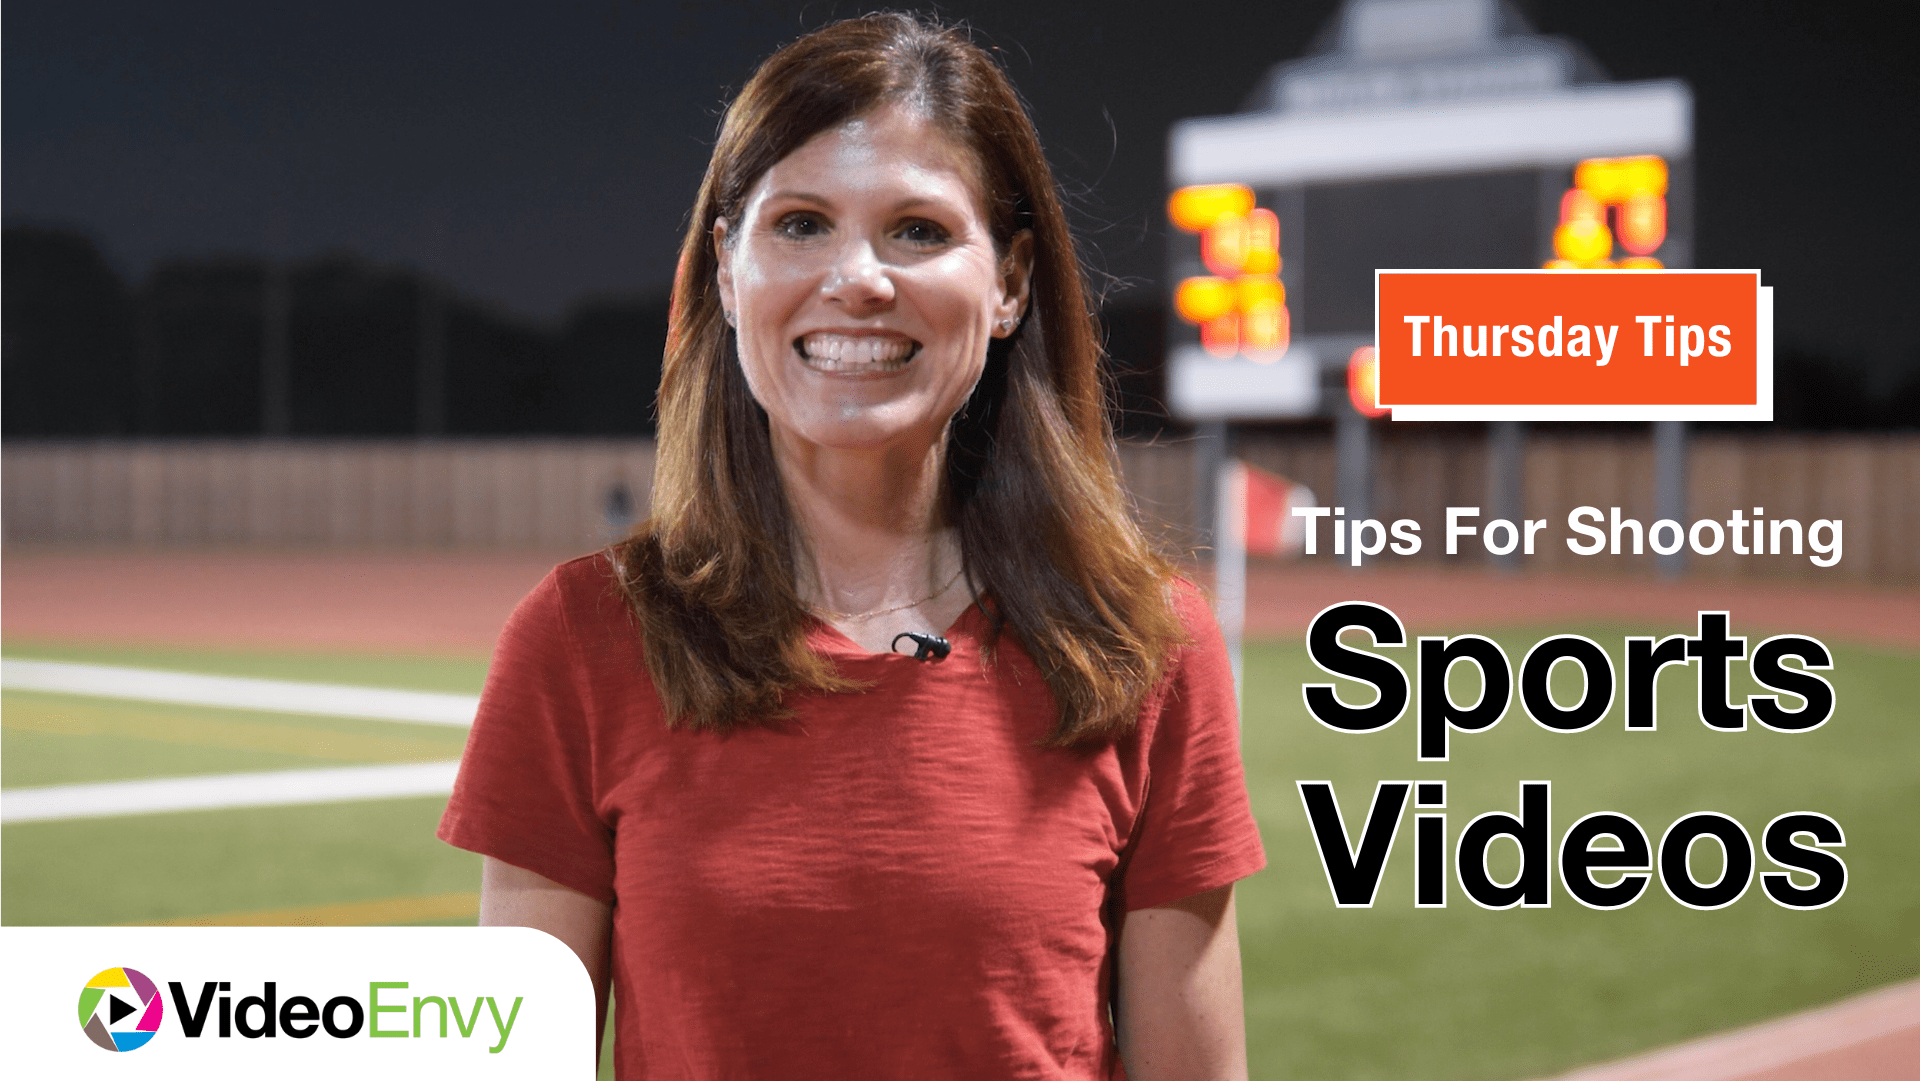 Thursday Tips: Shooting Video for Sports Events